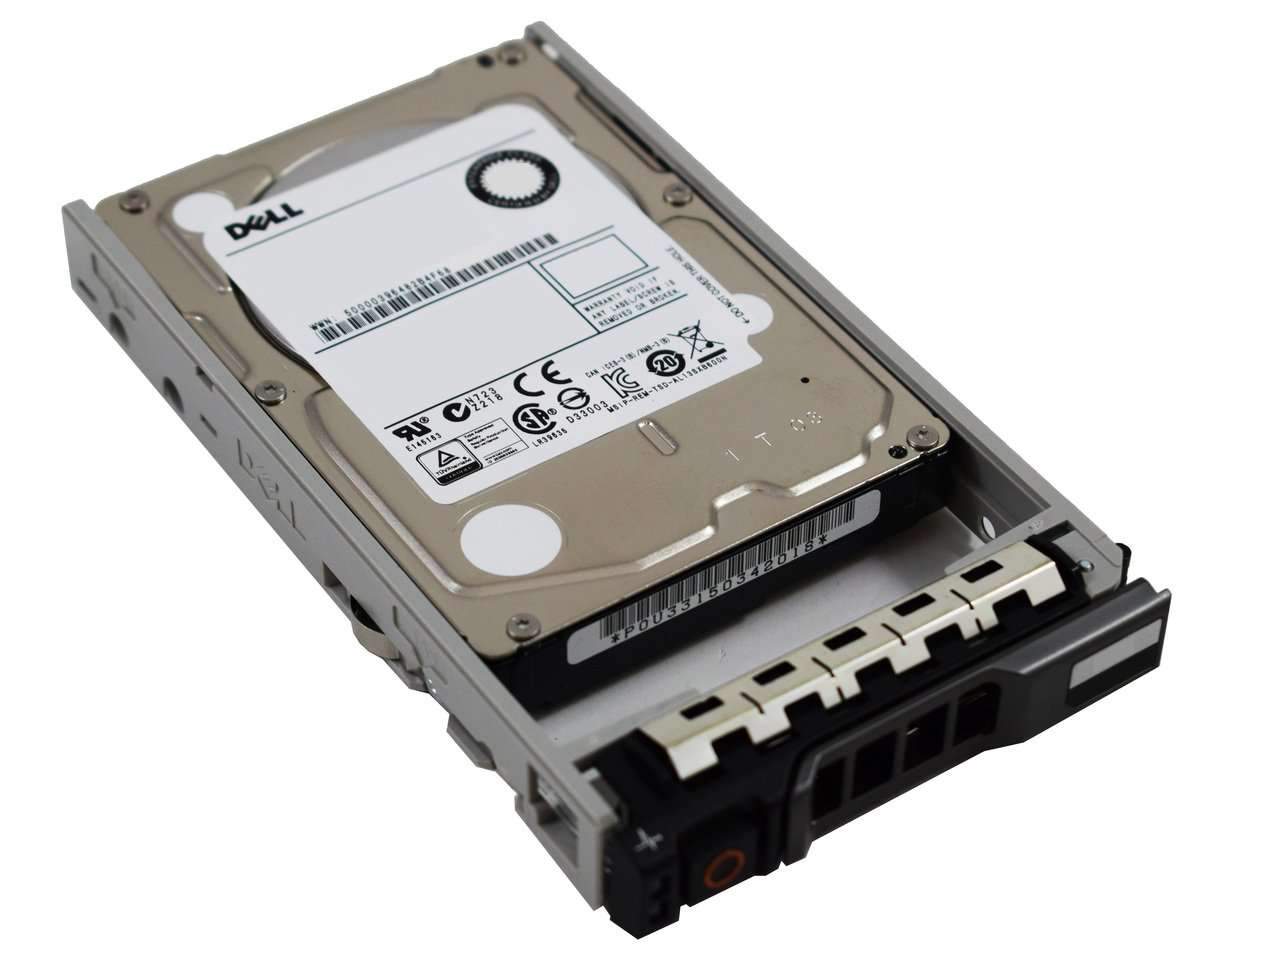 Dell G13 06XXF5 1.2TB 10K RPM SAS 6Gb/s 512n 2.5" SED Manufacturer Recertified HDD